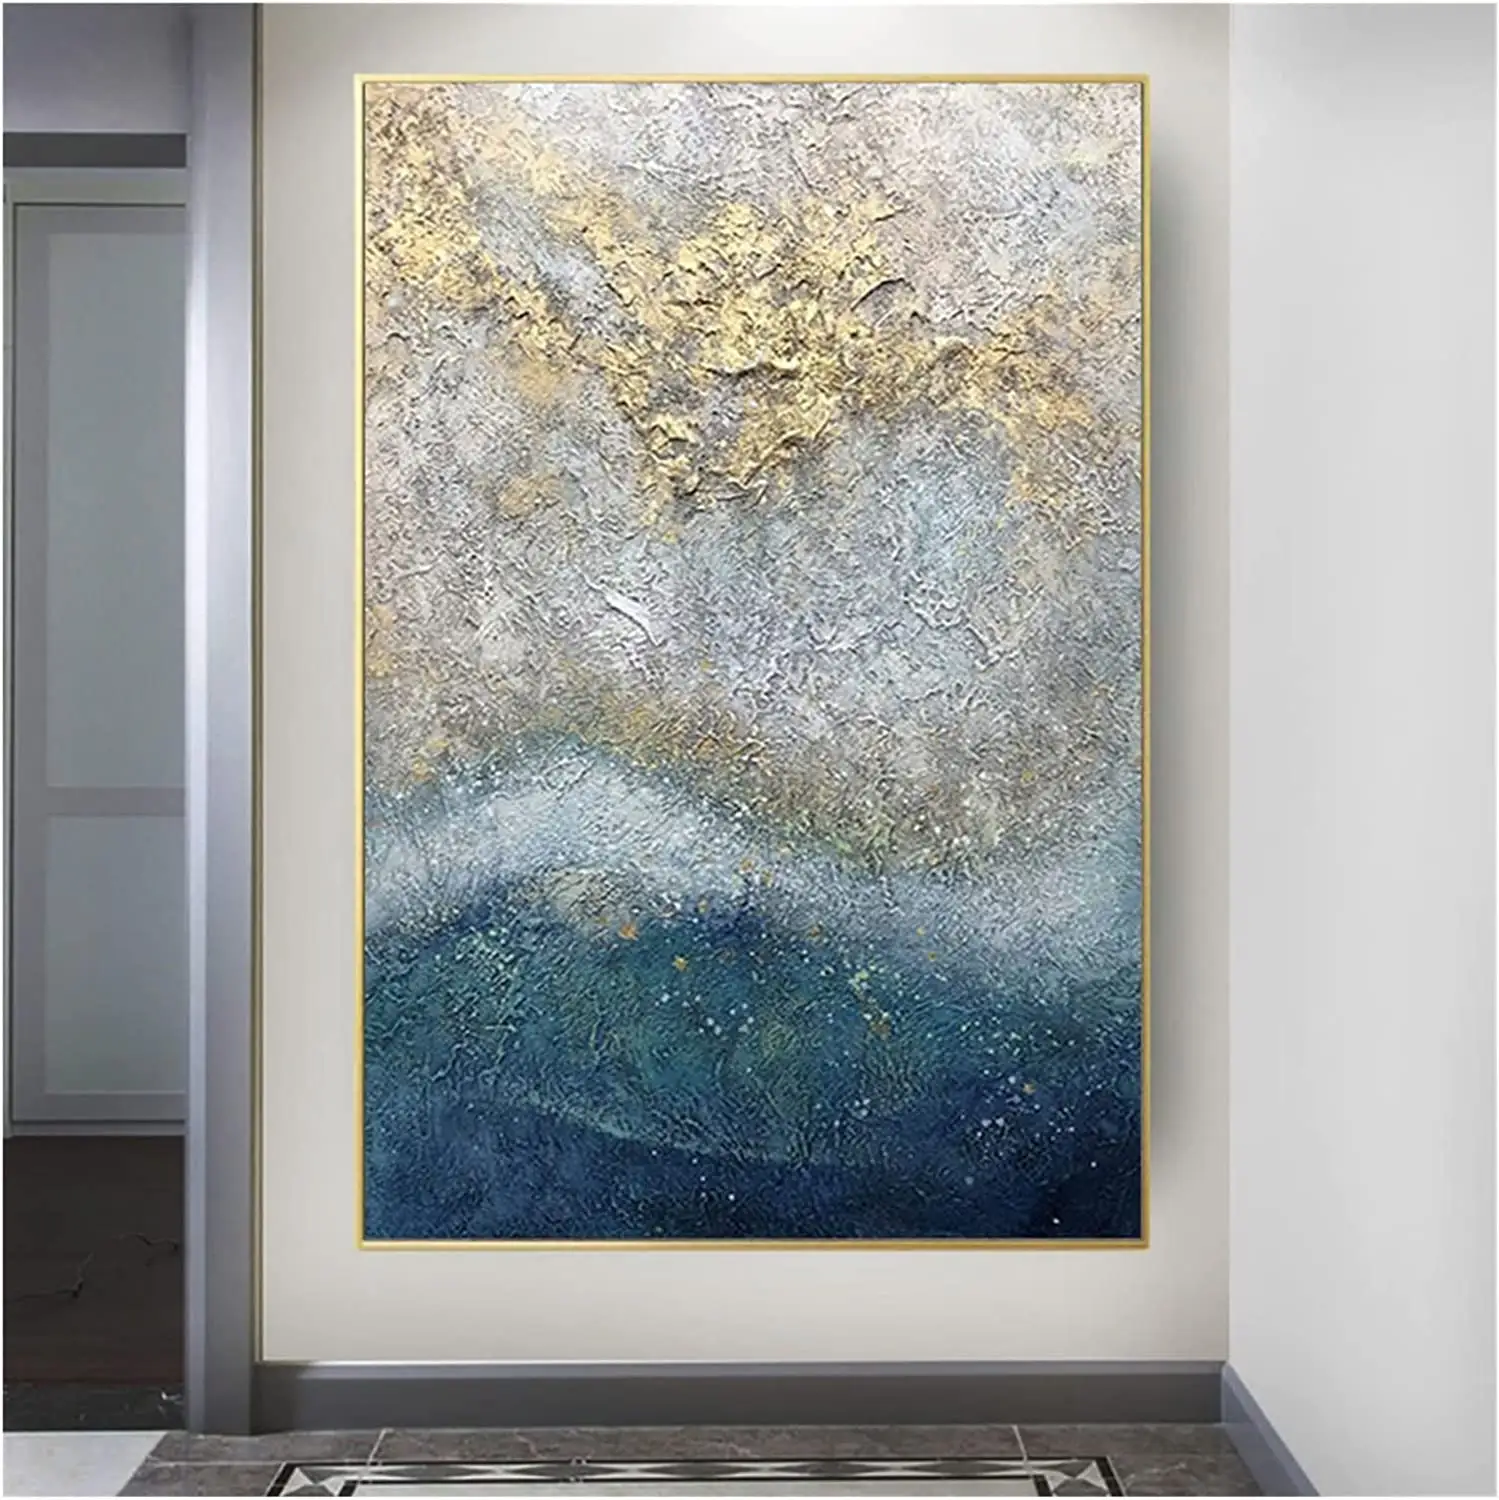 100% Hand-painted Heavy textured Golden Large Modern Abstract Acrylic Painting Oversize Room Wall Art